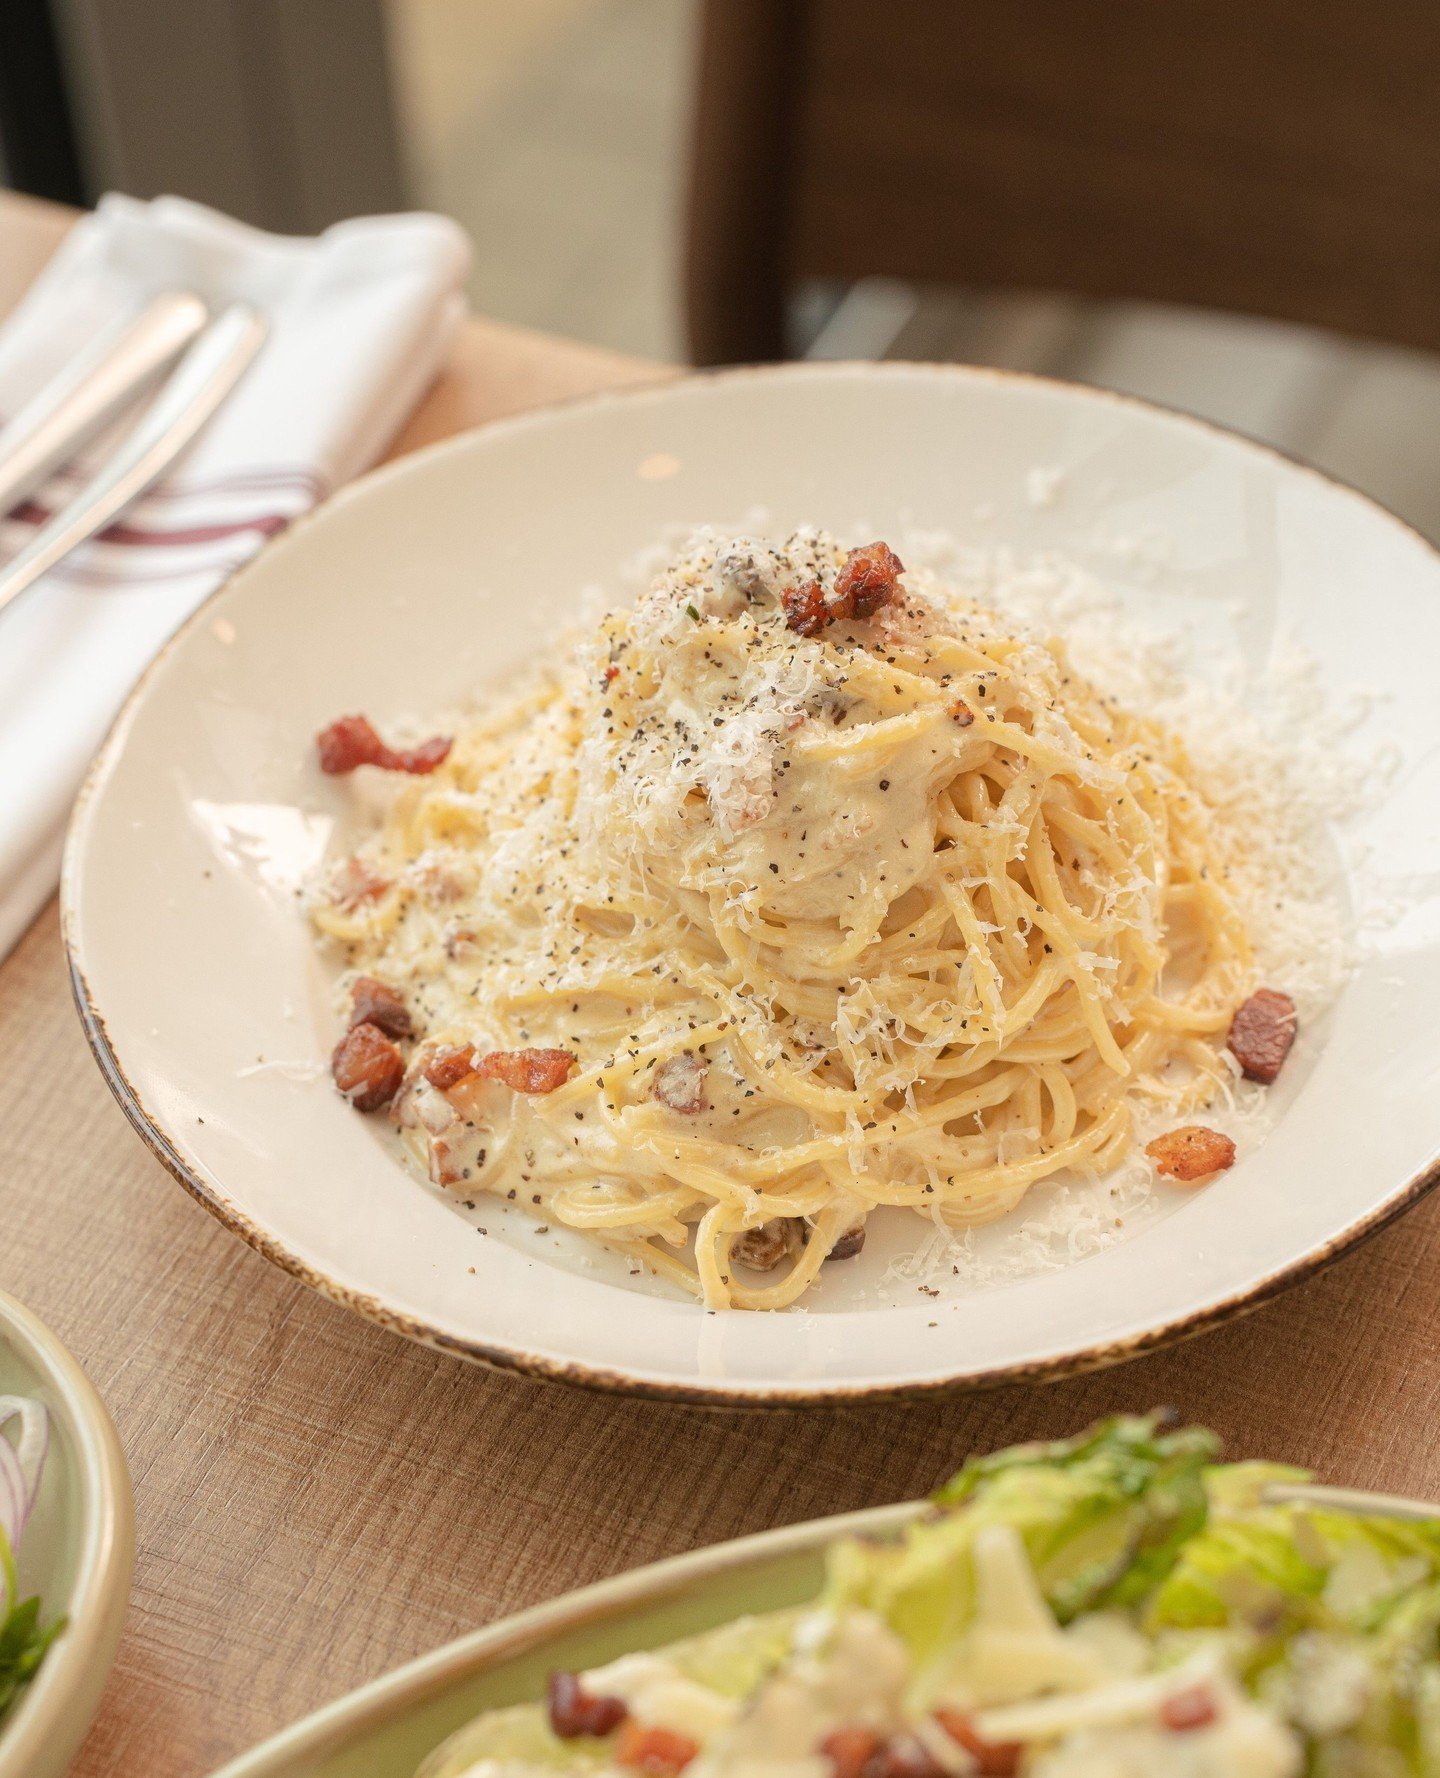 A classic and a favourite for a reason.⁠
⁠
The Carbonara, is a staple in our restaurant. This creamy pasta paired with crunchy guanciale makes for a very satisfying dinner. ⁠
⁠
Always welcoming egg, guanciale, onion, cream sauce, and grana padano int